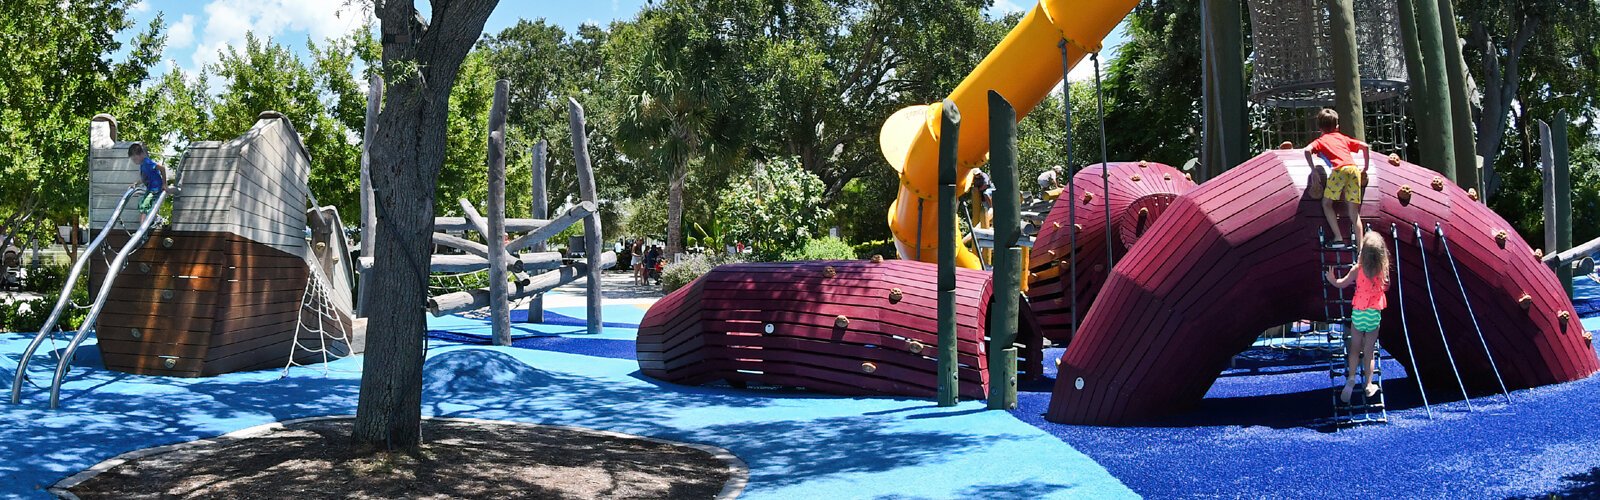 Designed by one of the premier playground companies in North America, the Glazer Family Playground provides a nautical-themed play adventure for children ages 2 to 12.